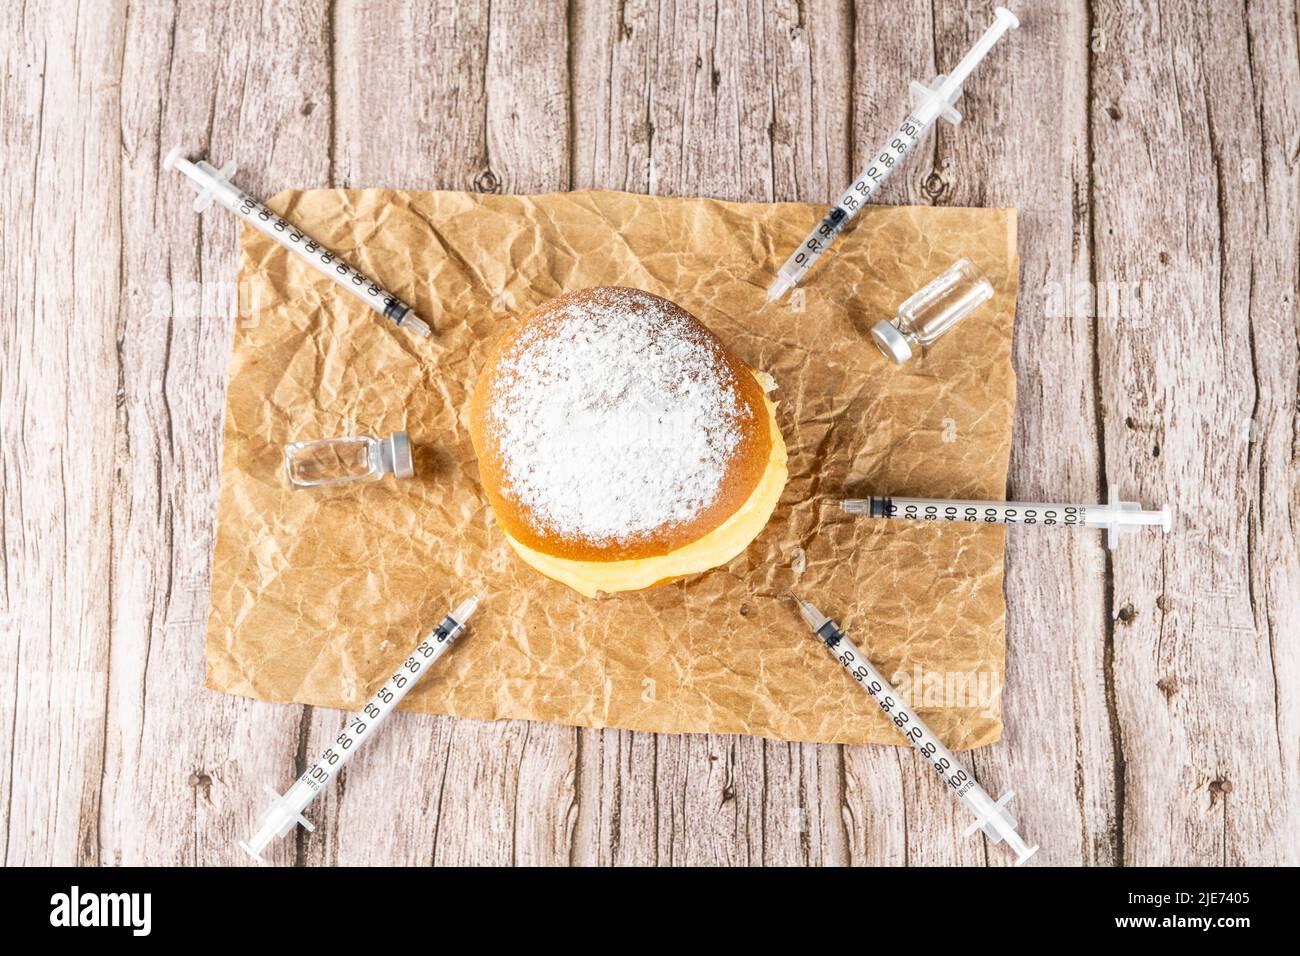 Brazilian cream doughnuts surrounded by various syringes and ampoules with insulin. Stock Photo